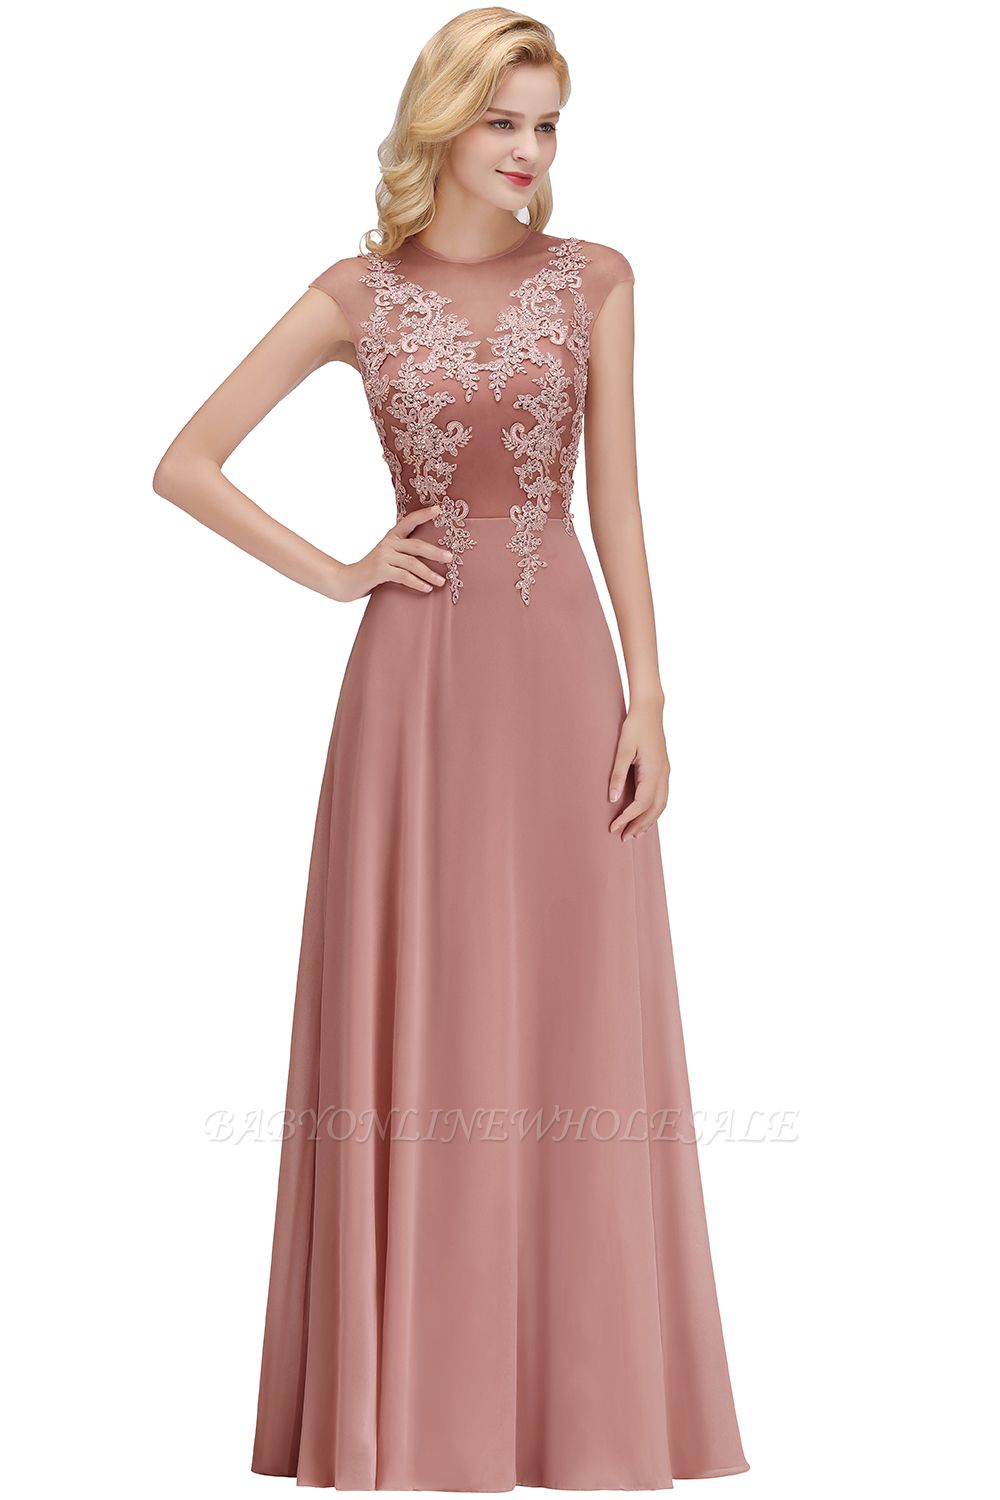 Cap Sleeve Lace Appliques Beads Slim A-line Evening Prom Dress for Women